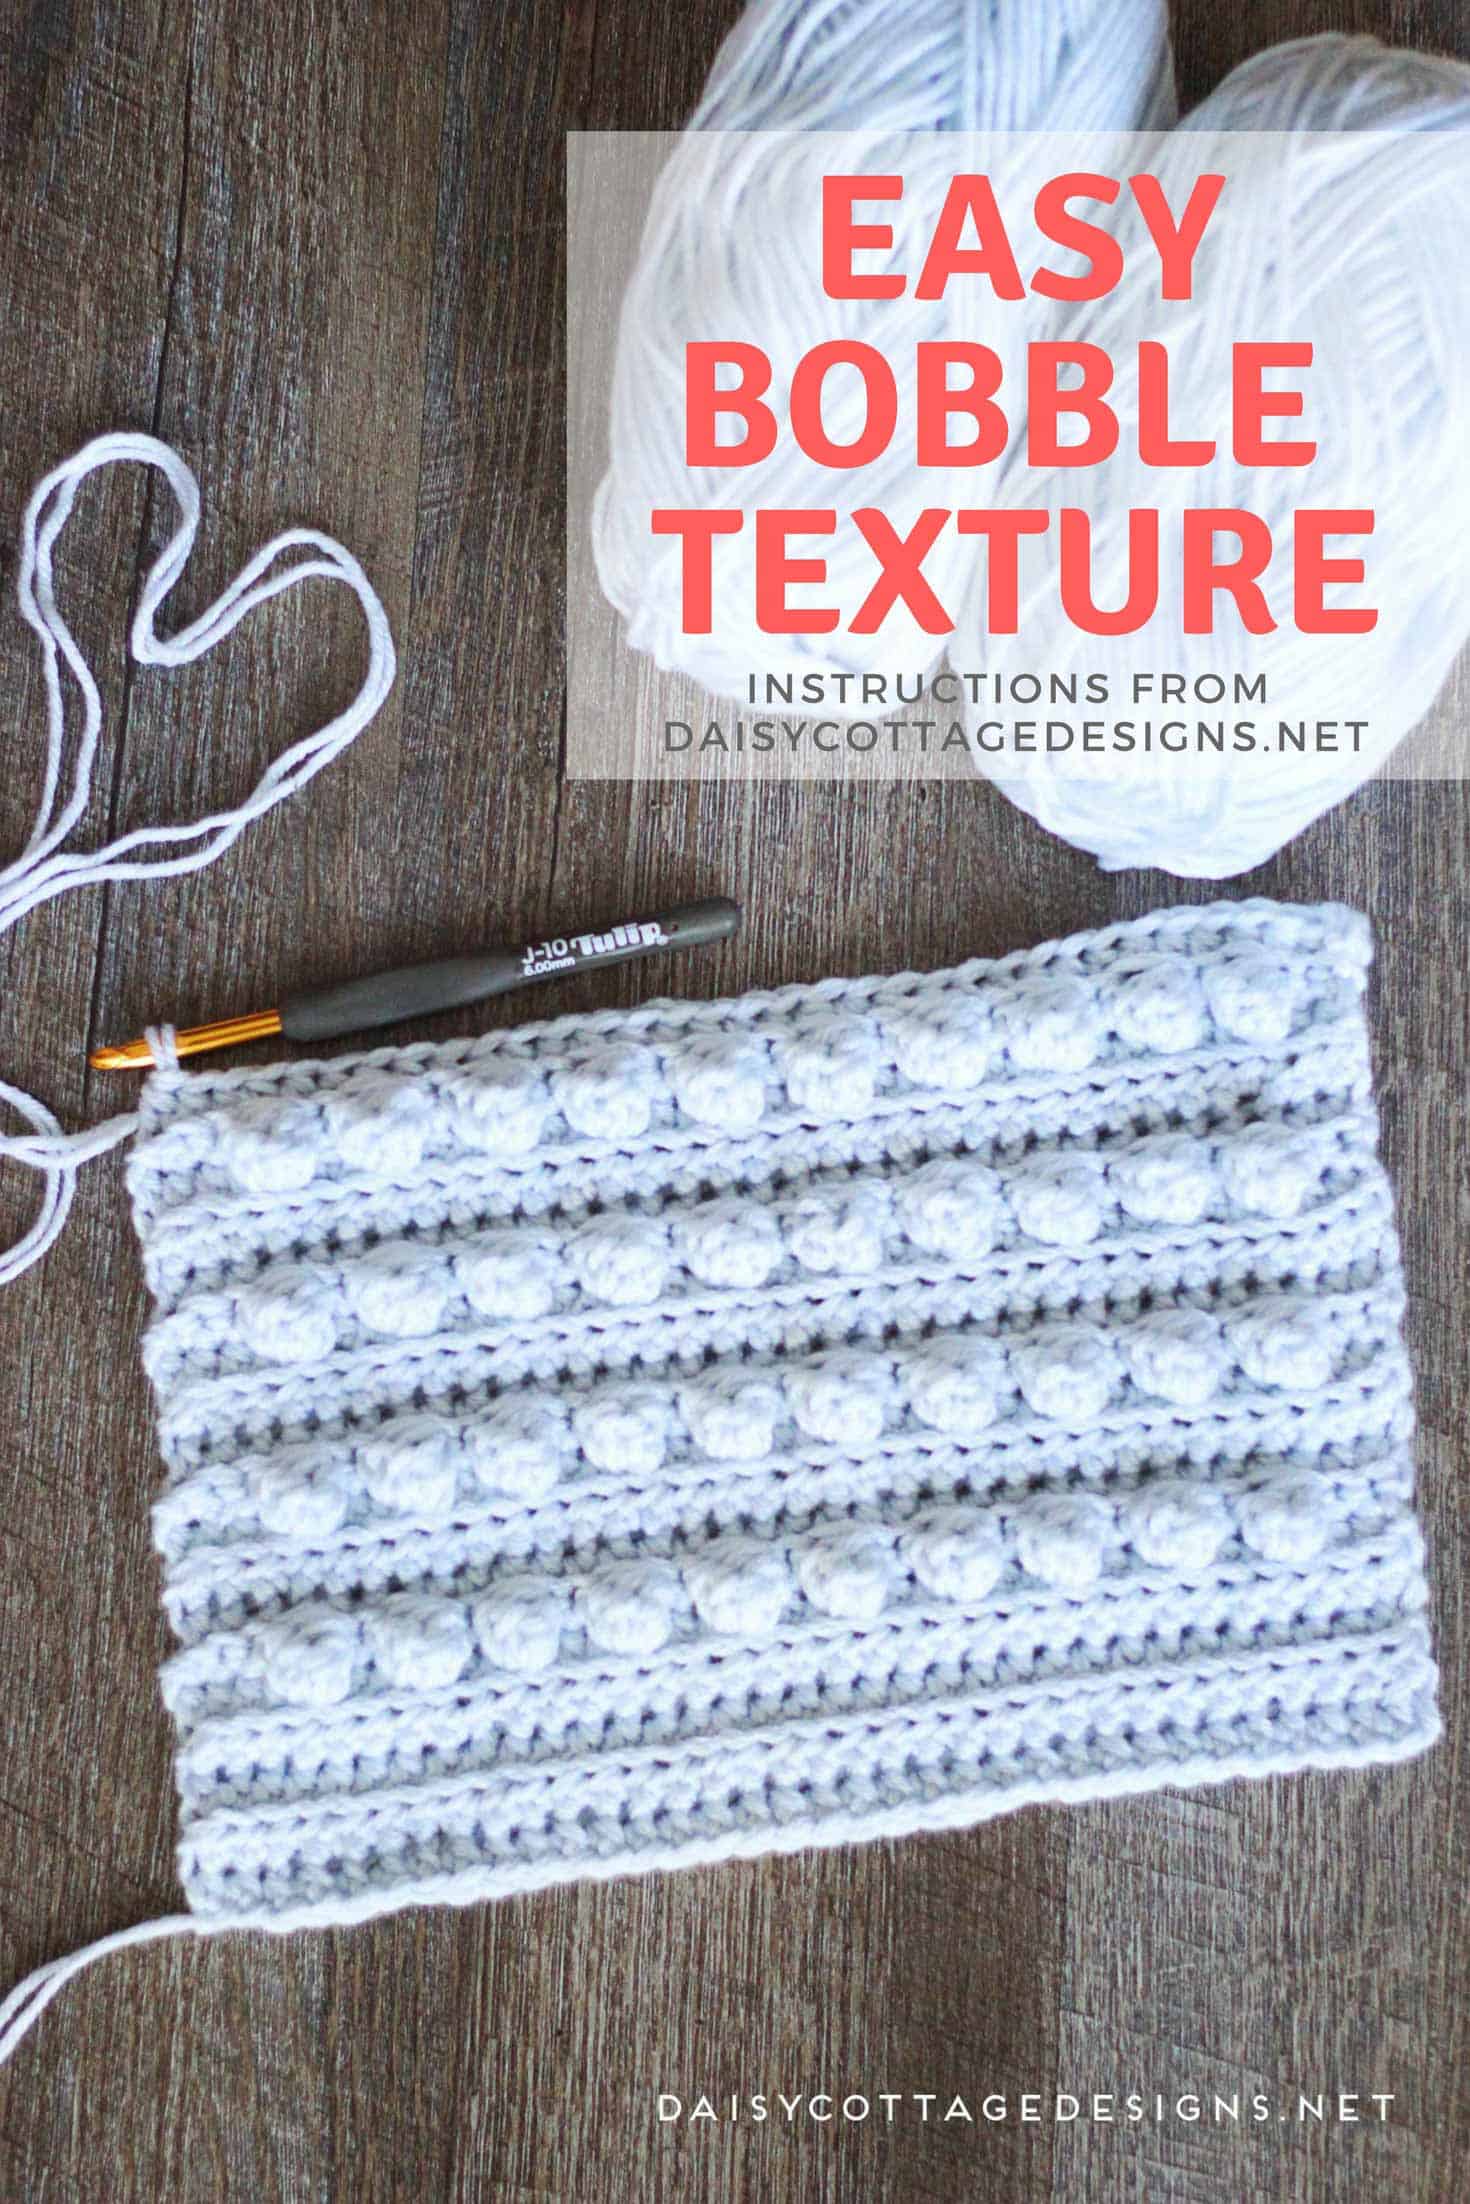 Learn how to crochet a textured piece using this bobble crochet pattern from Daisy Cottage Designs | free crochet pattern, bobble crochet pattern, easy bobble crochet pattern, ribbed crochet pattern